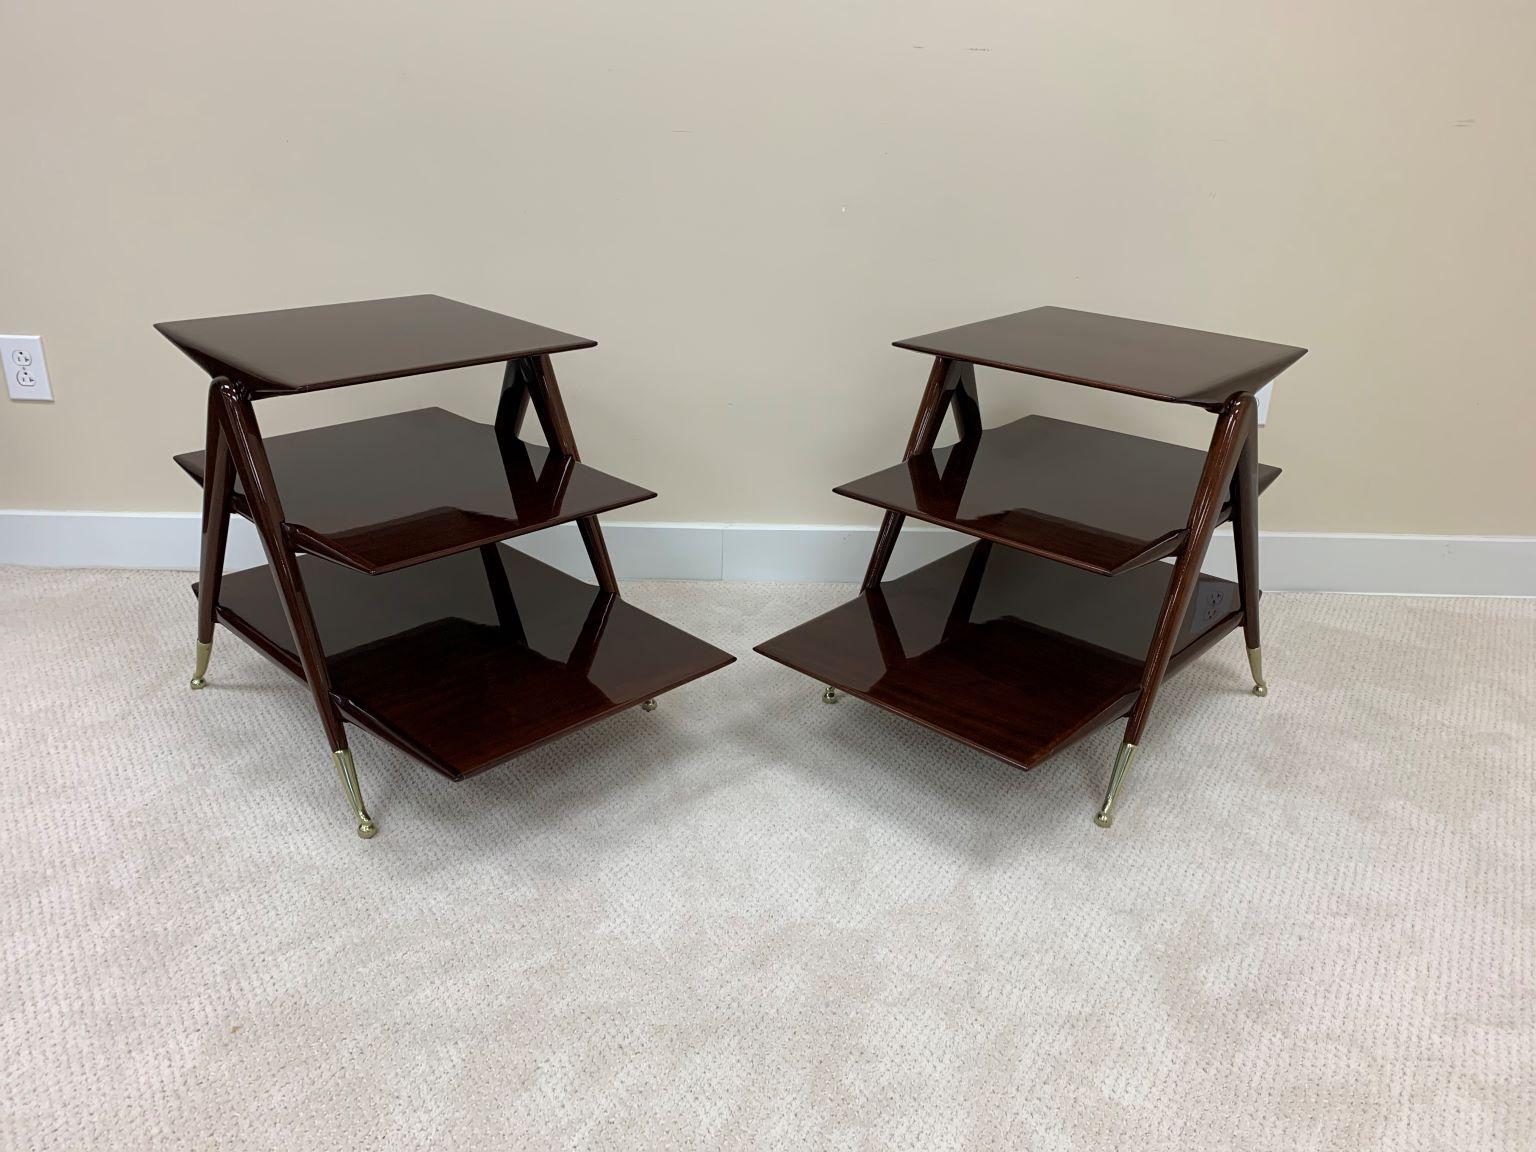 Incredible pair of mid century side tables in the style of Ico Parisi. The tables have three-tiered shelves of graduated lengths supported by an inverted-v leg. The walnut has been beautifully restored in a gloss finished accented with re-polished